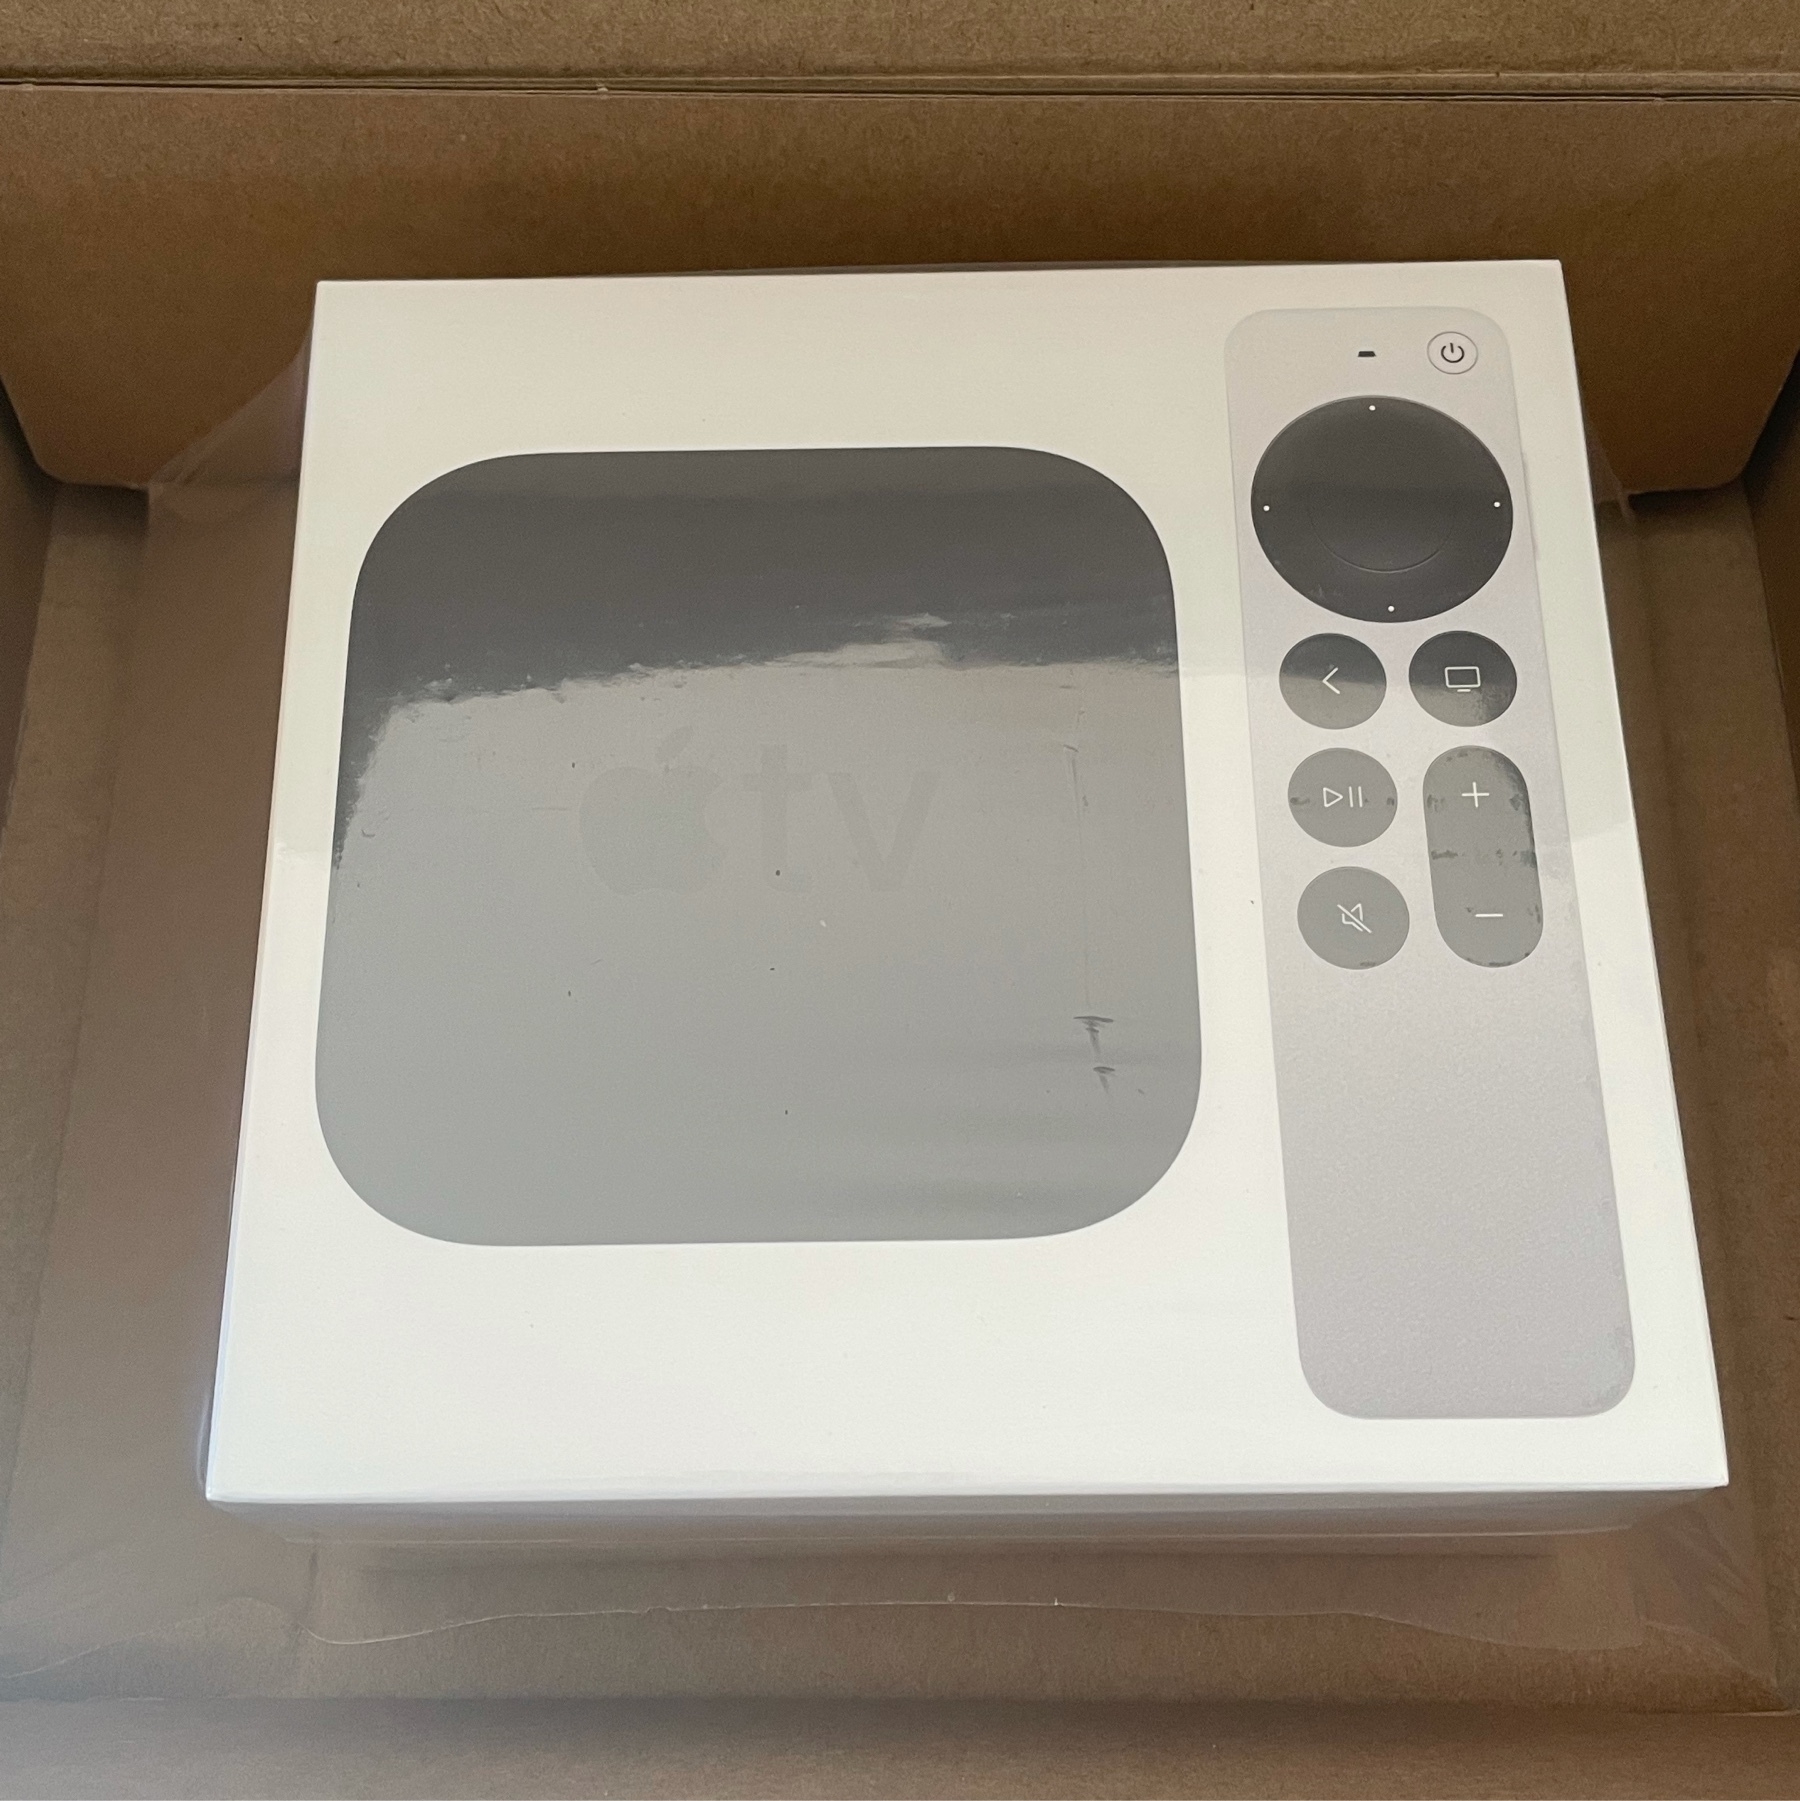 My new Apple TV just arrived!